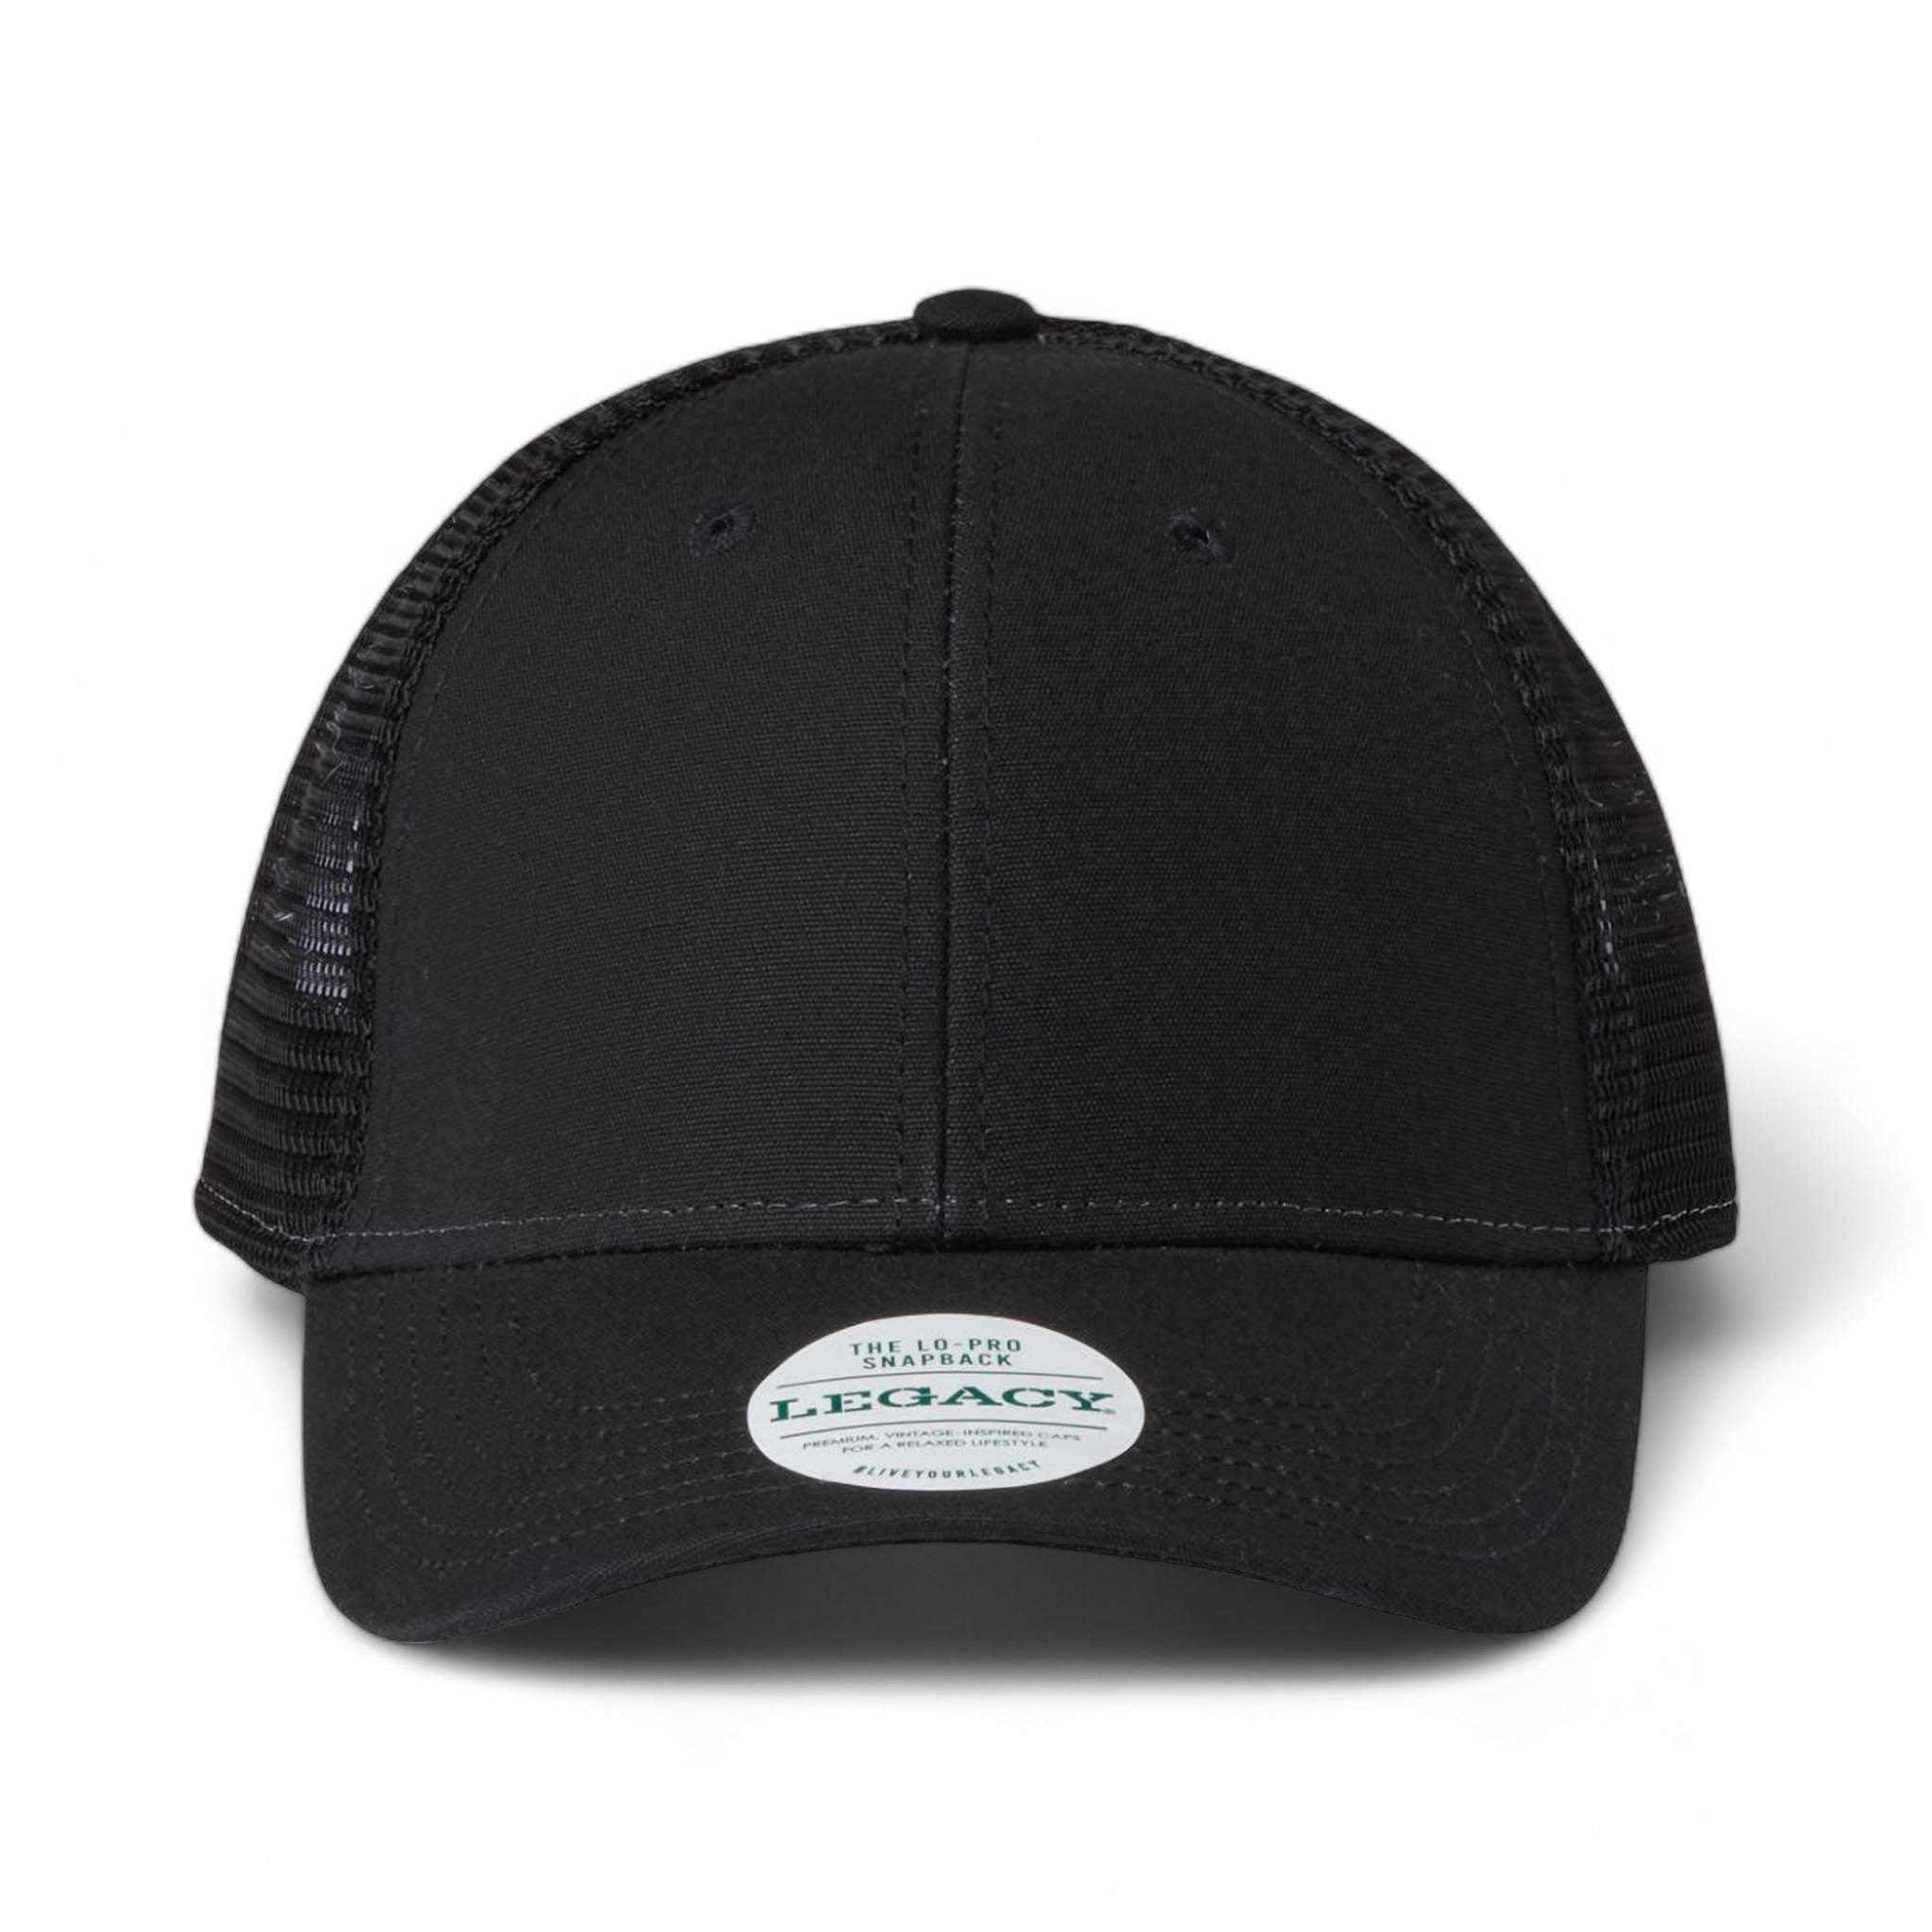 Front view of LEGACY LPS custom hat in black and black